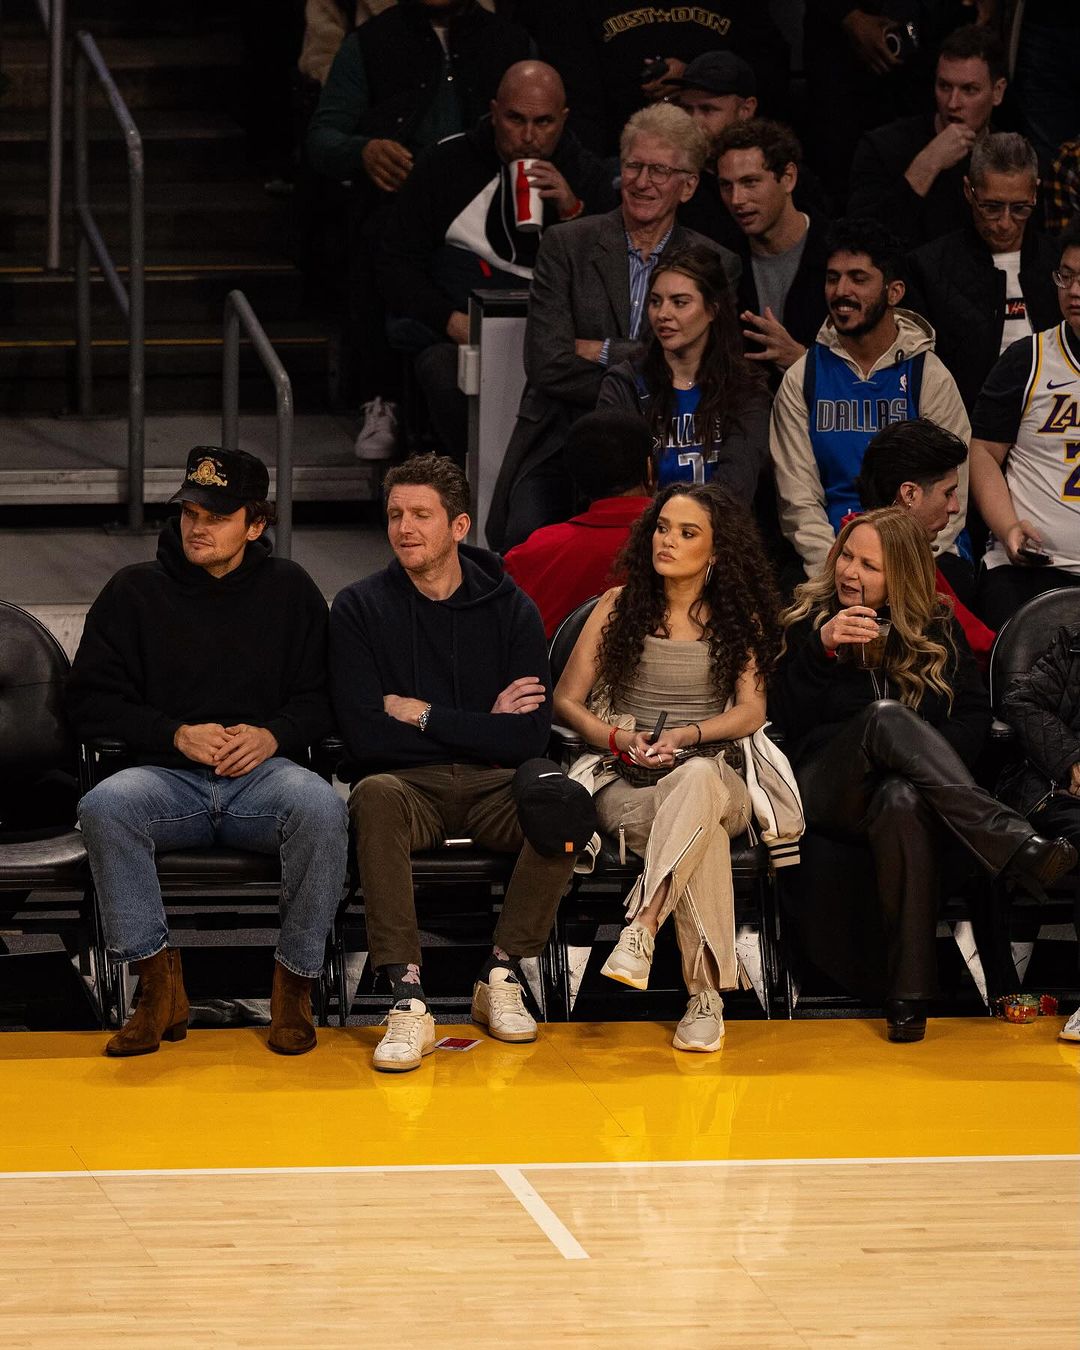 Madison Pettis is a Lakers Fan! - Photo 3